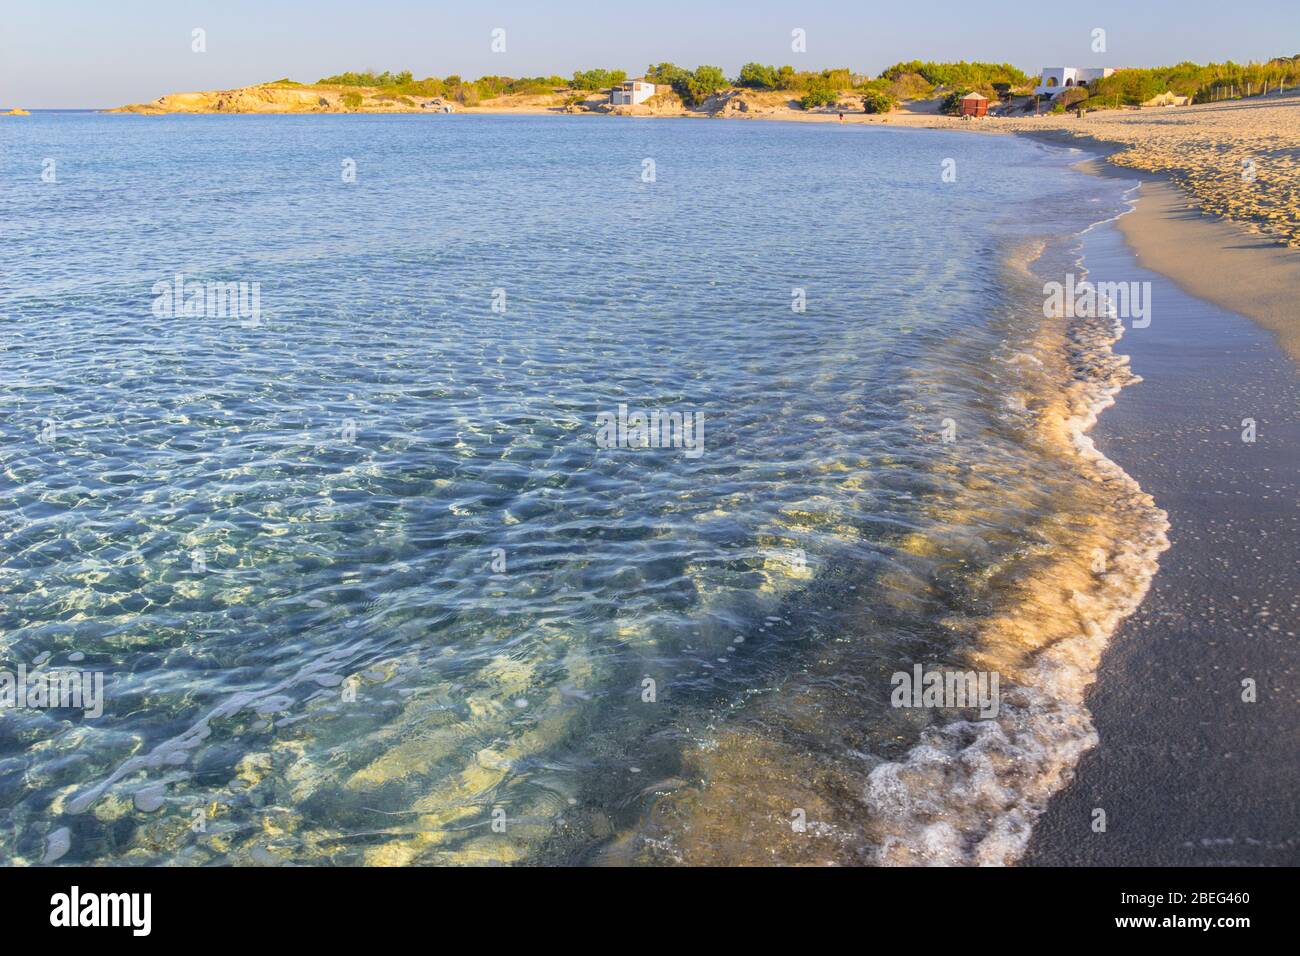 The most beautiful sandy beaches of Apulia: Marina di Pulsano (Italy).  The coast is characterized by a alternation of sandy coves and jagged cliffs. Stock Photo